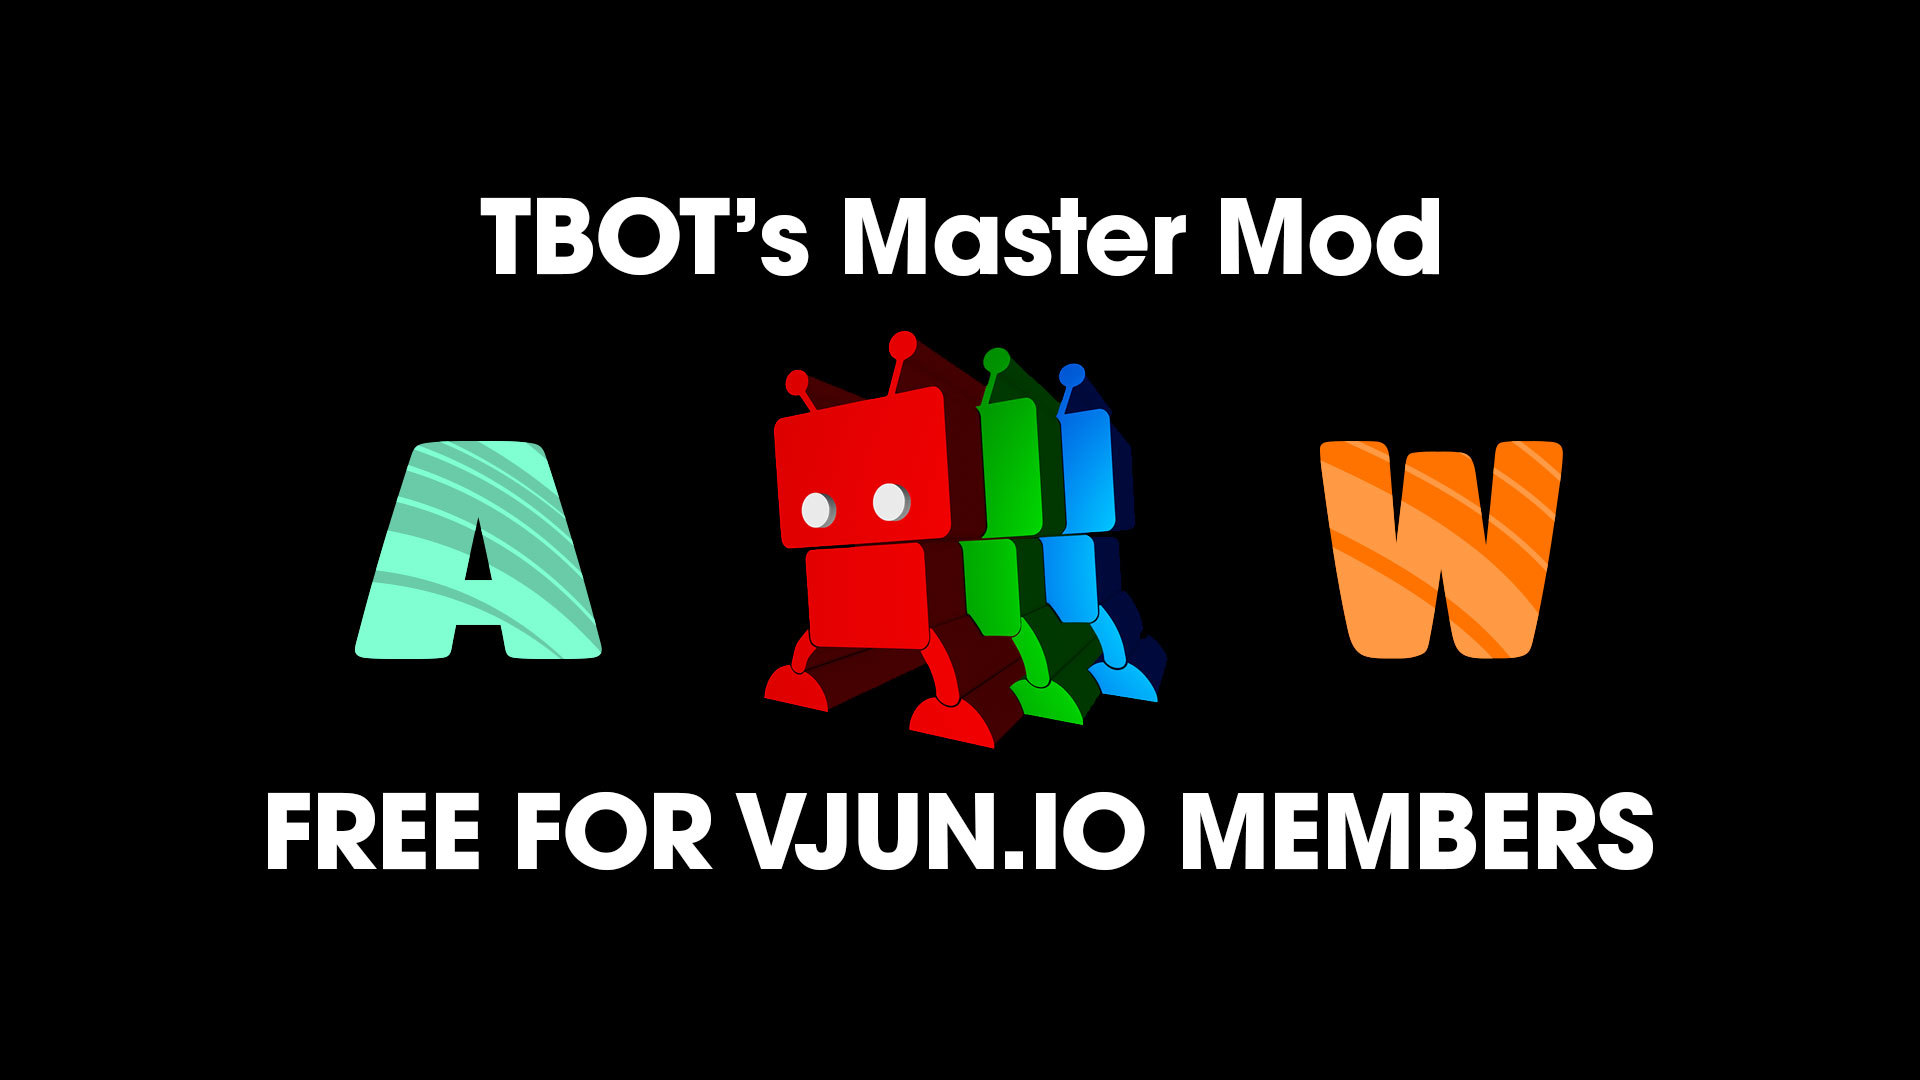 Cover image for TBOT's Master Mod v1.1 for Resolume Arena - Available for FREE on Juicebar NOW!